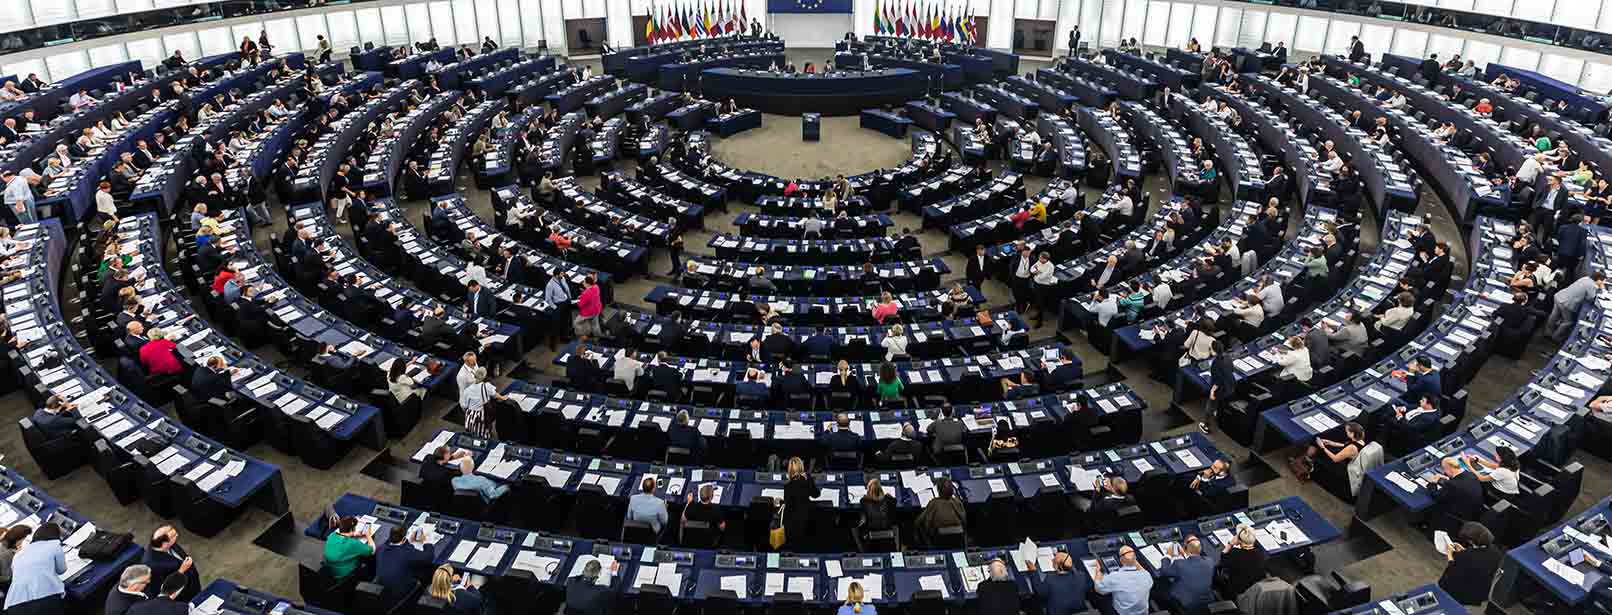 Alleged EU Parliament corruption is ‘very worrisome’ – chief